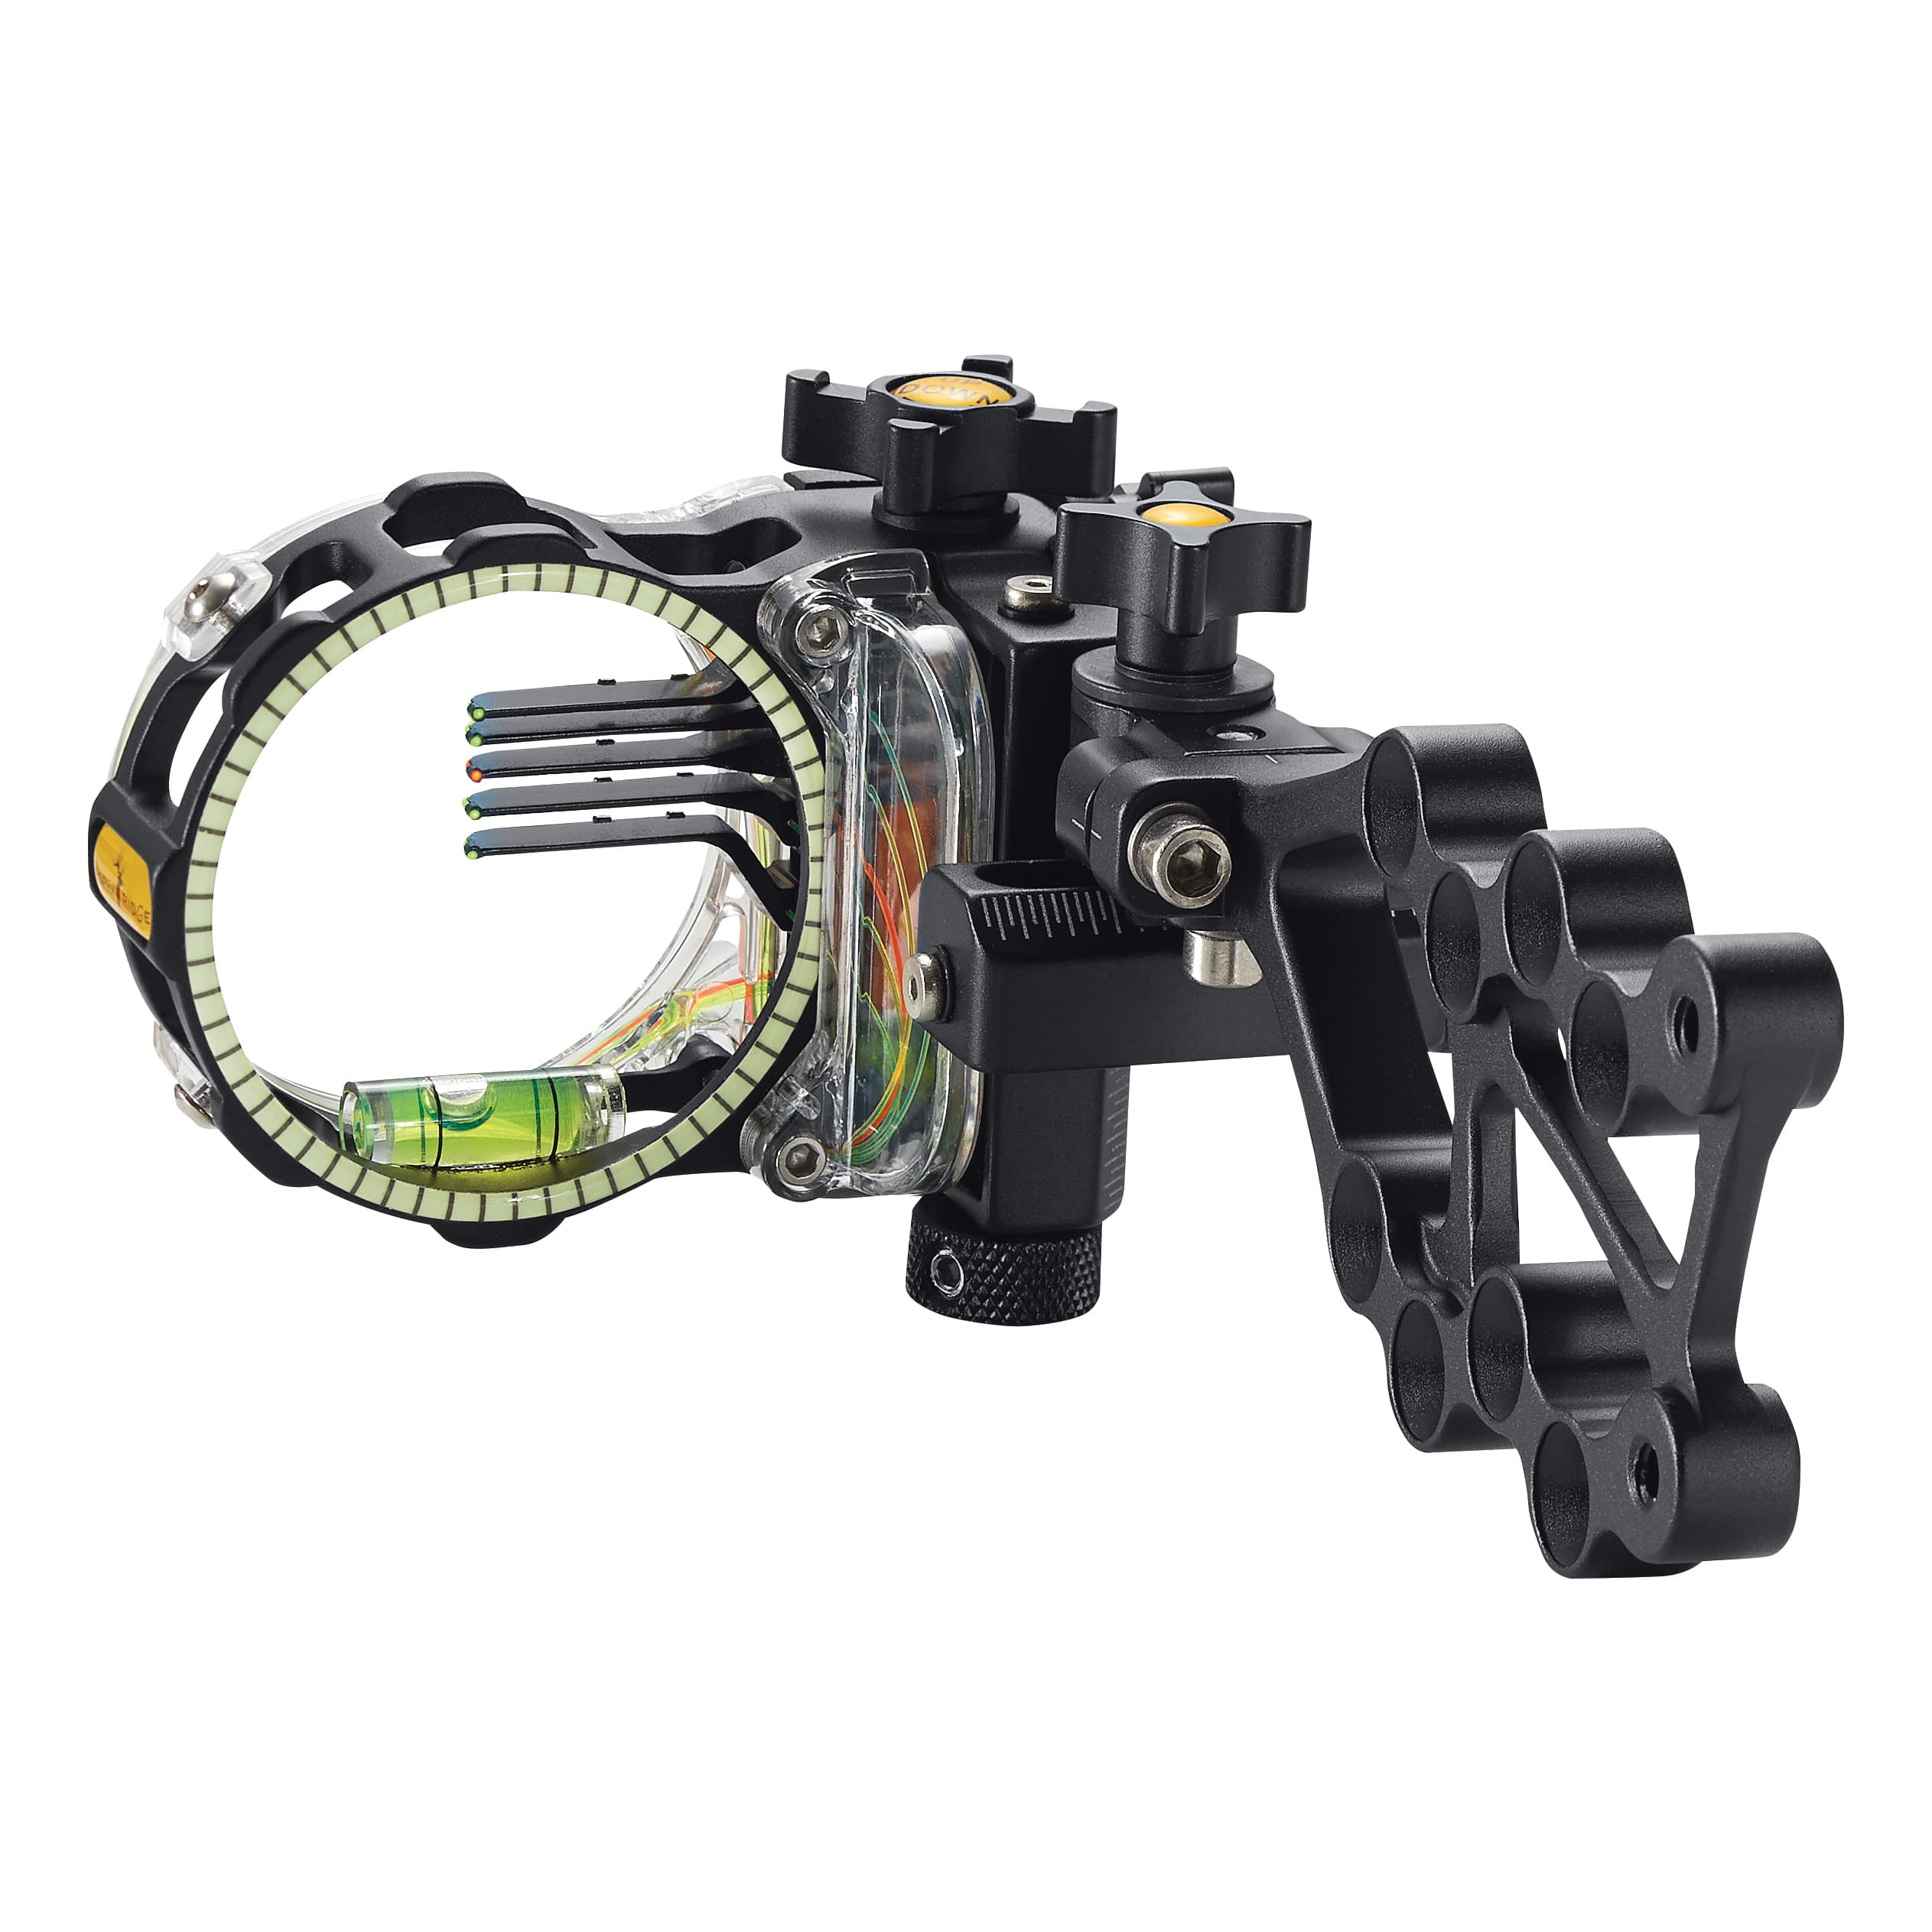 Trophy Ridge® React Pro Five-Pin Right-Hand Bow Sight - Detail View